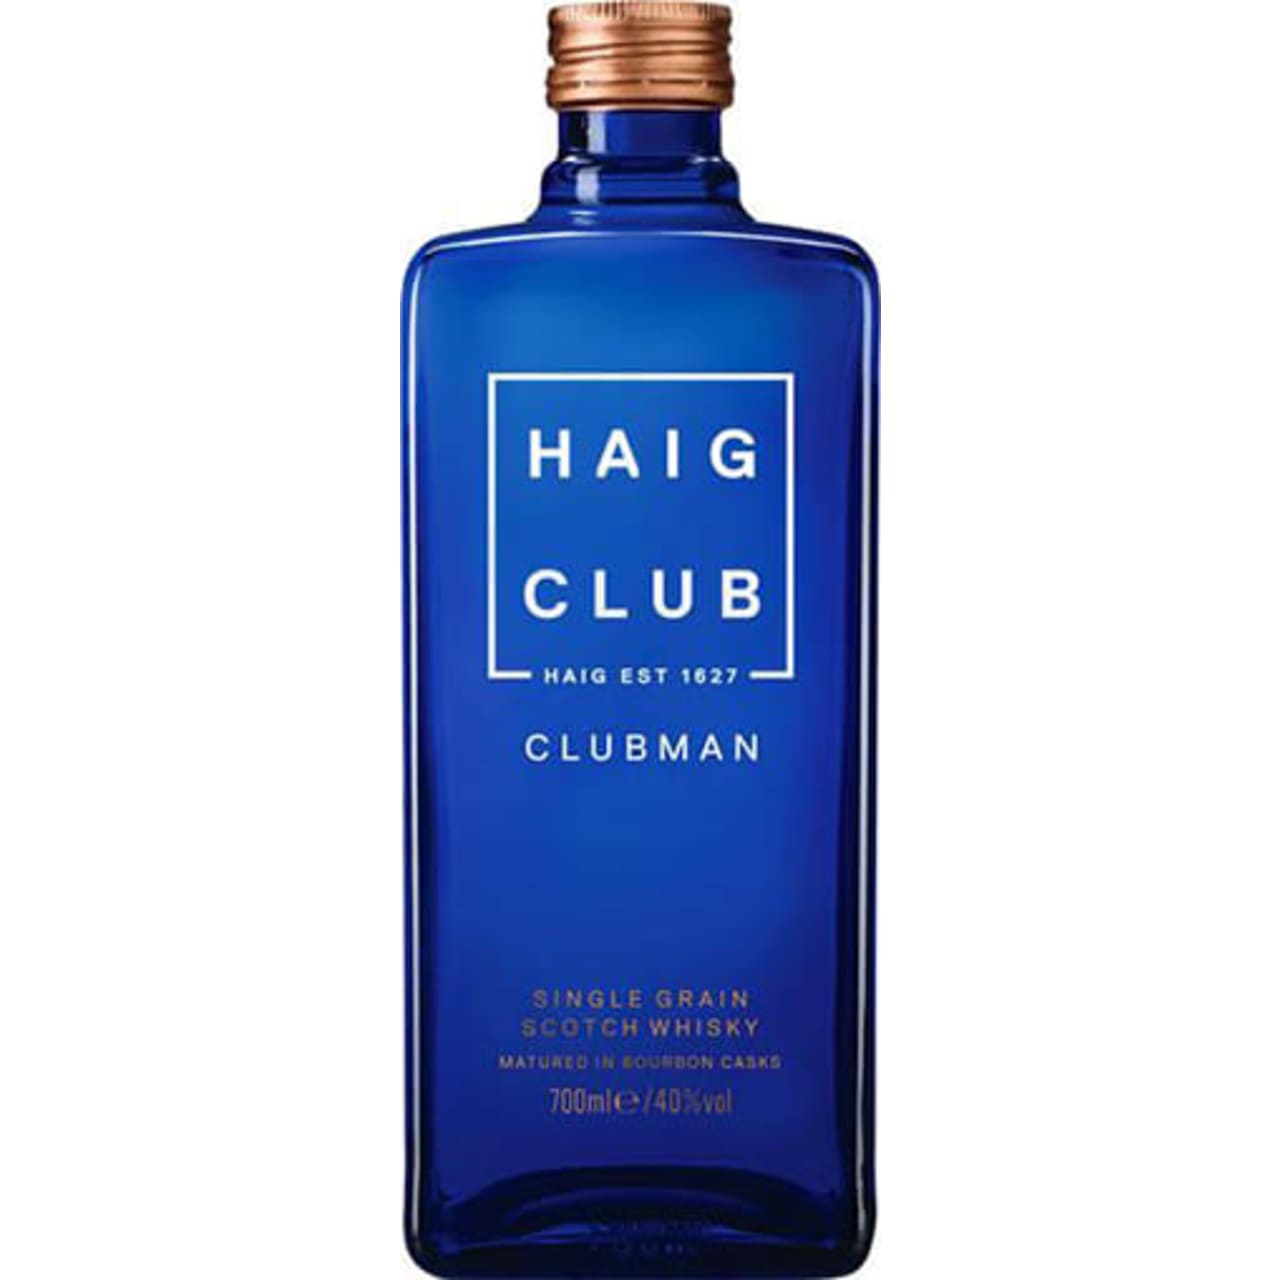 Haig Club Clubman is matured exclusively in ex-bourbon American oak casks – leaving the whisky with a more translucent gold colour and a softer, gentler finish with notes of coconut and vanilla.